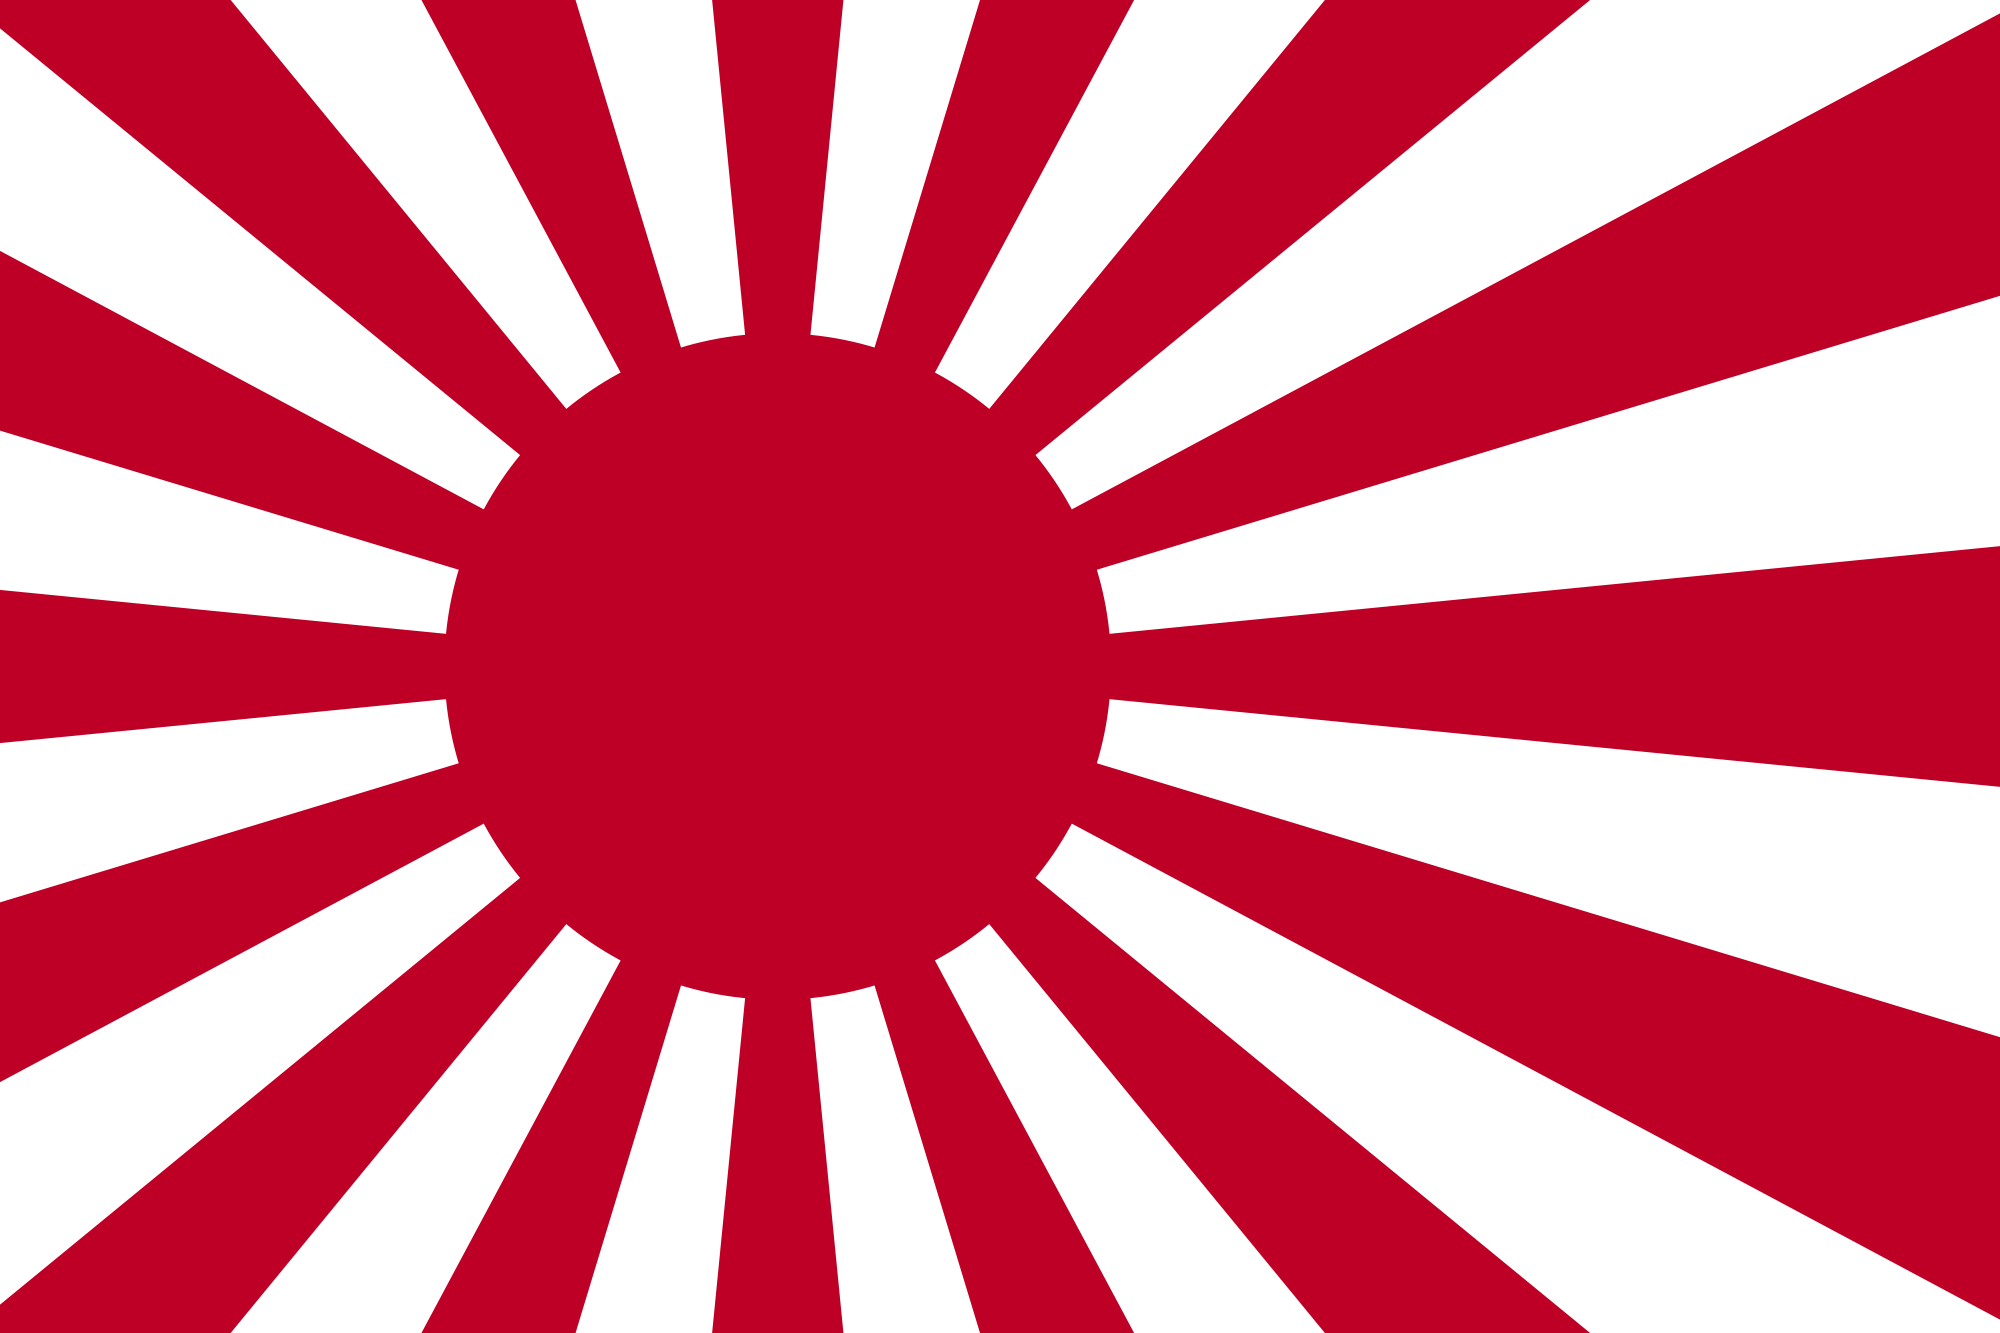 800px-Flag of Japan.png